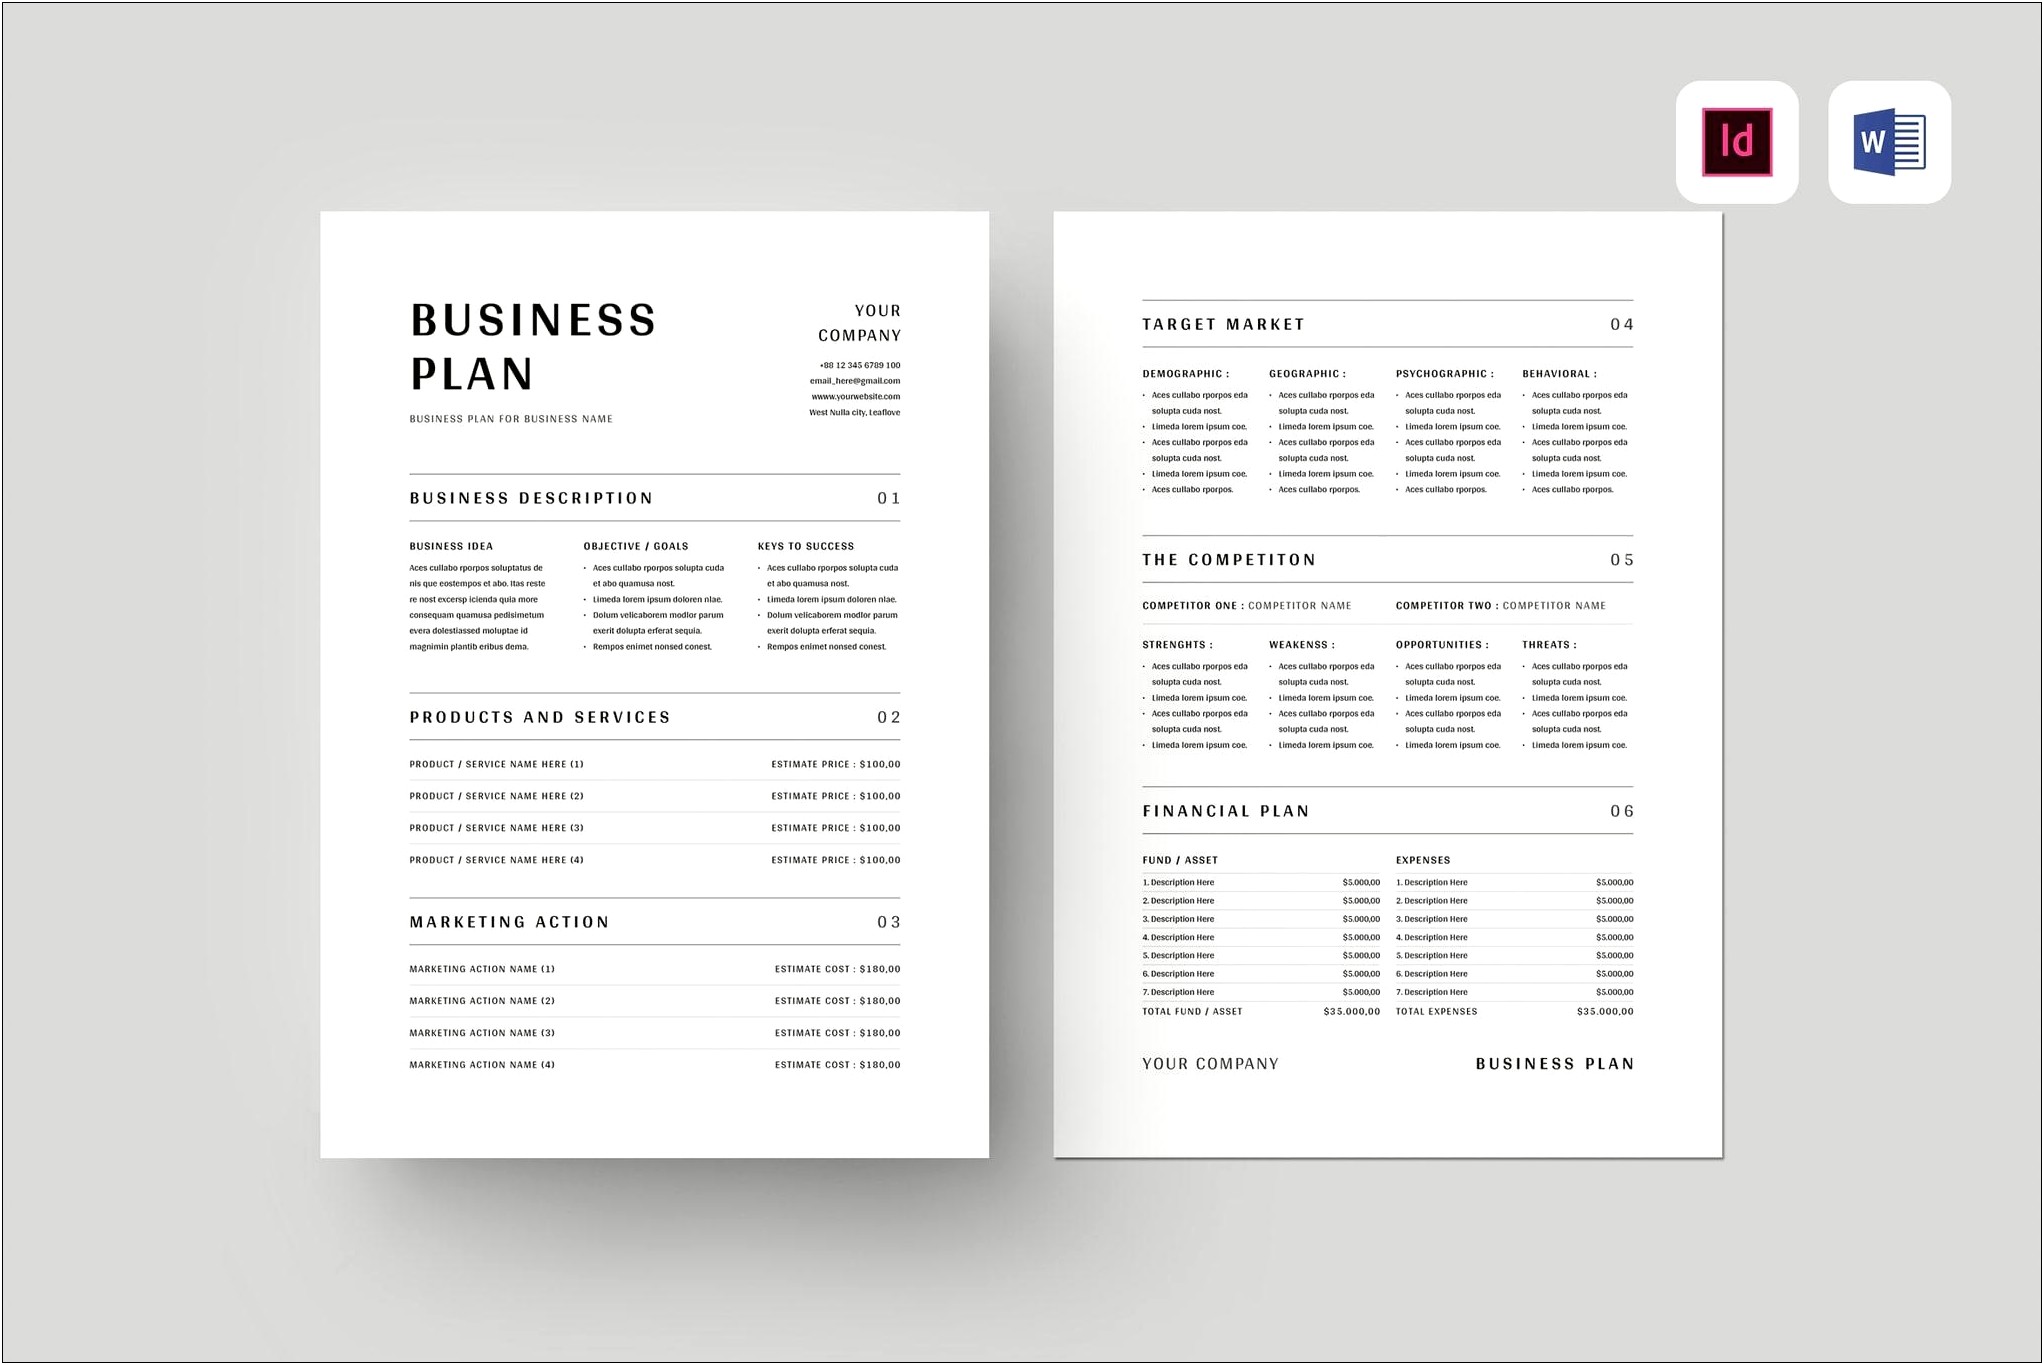 Business Plan Template In Word 2007